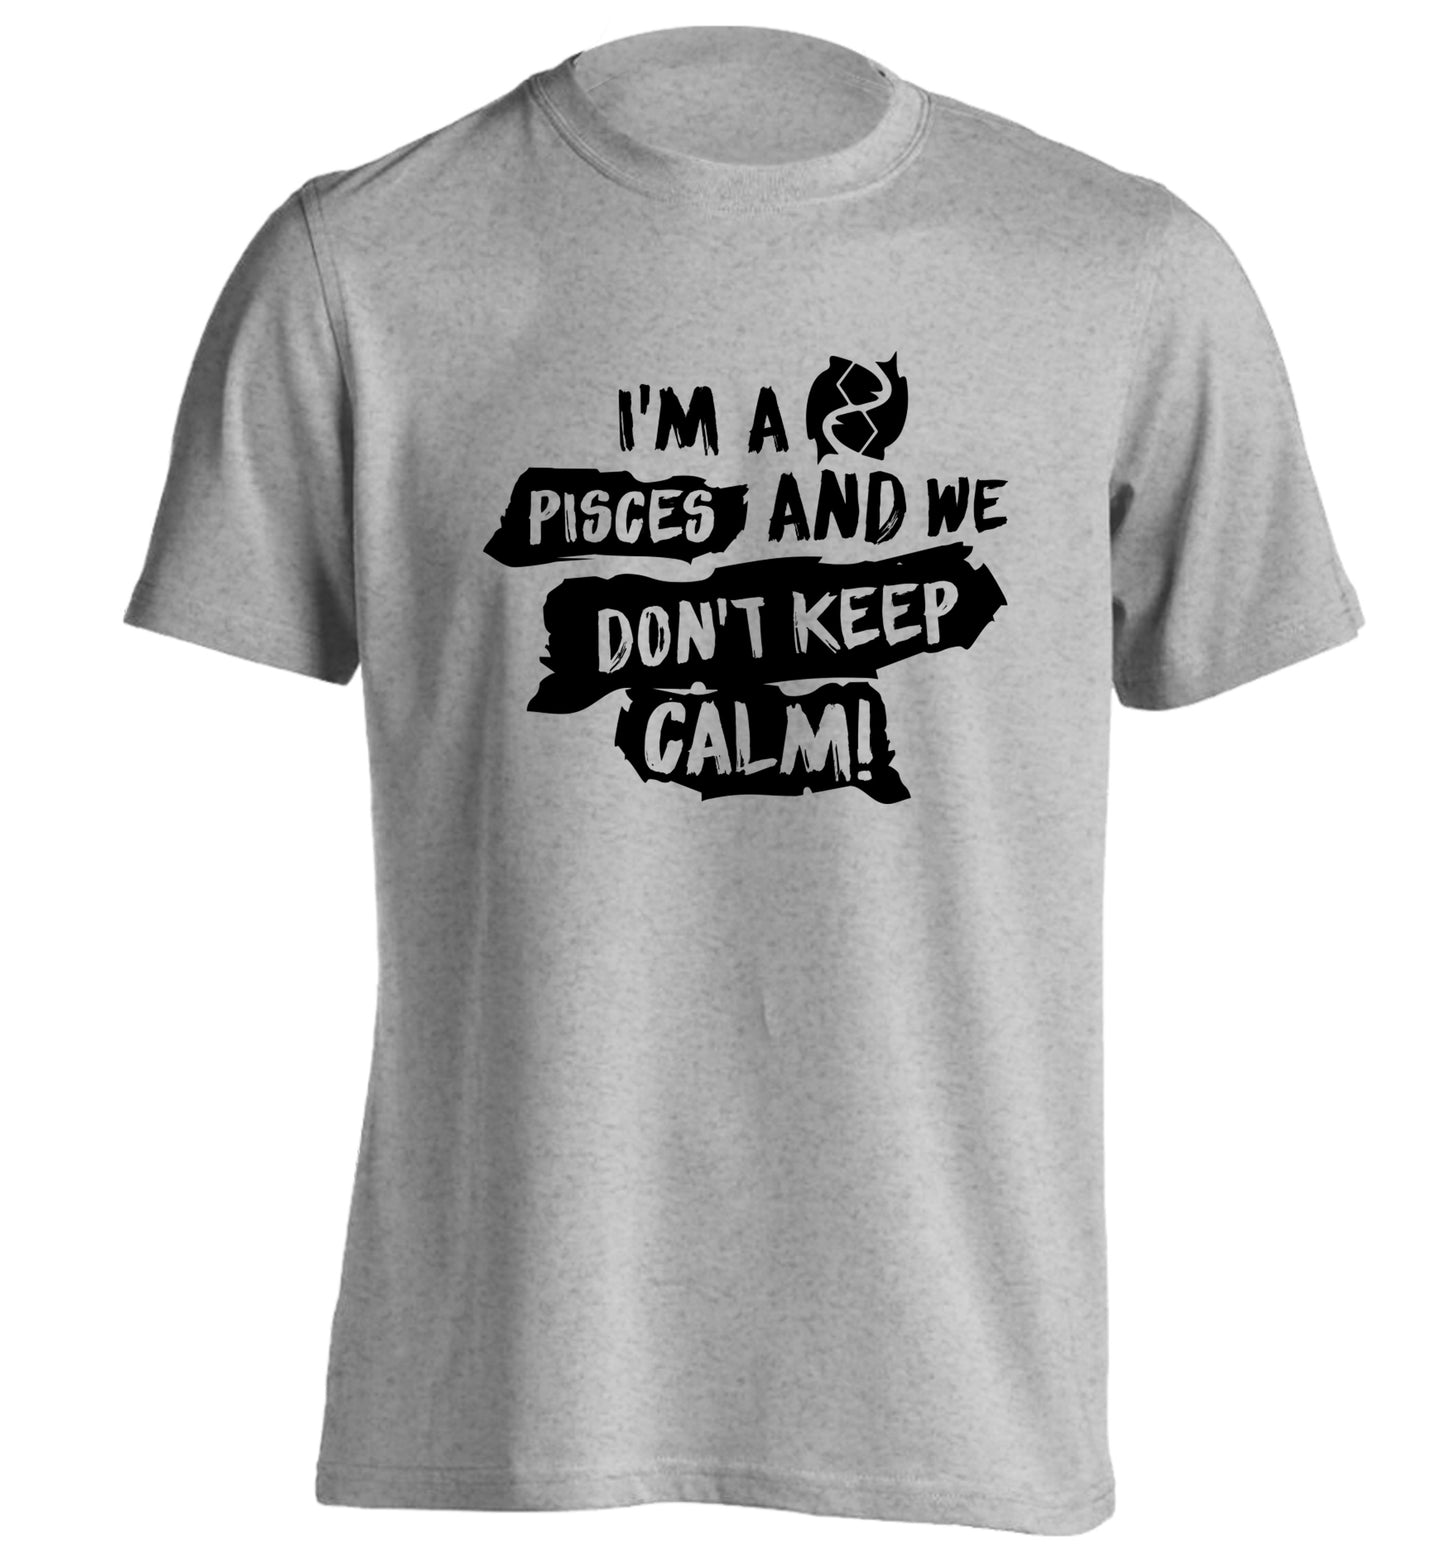 I'm a pisces and we don't keep calm adults unisex grey Tshirt 2XL